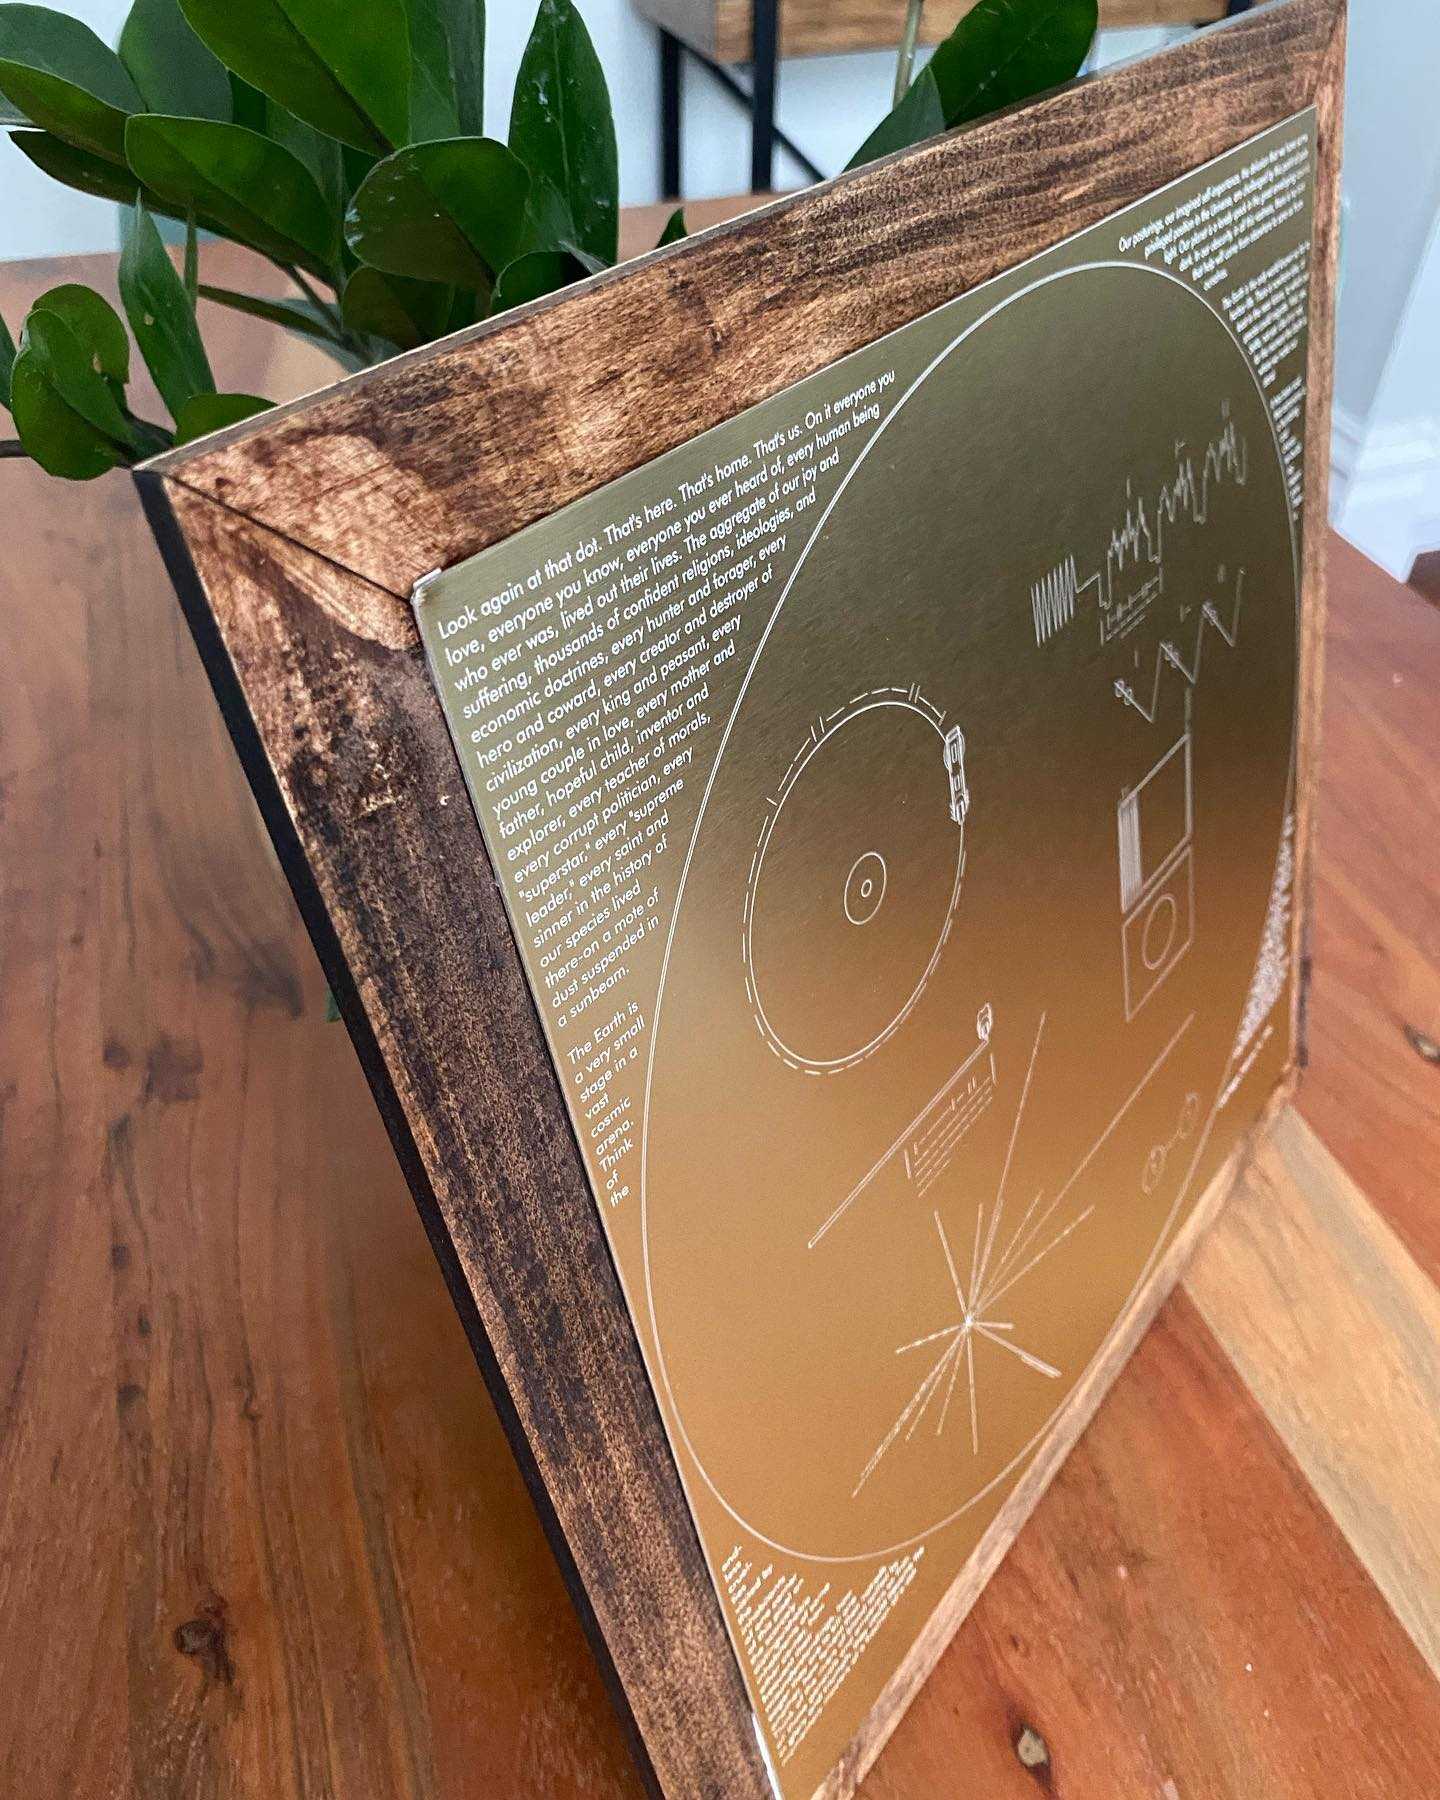 One of my best friends is a huge space nerd, so for his birthday I built him a replica of the Voyager record plaque in laser engraved gold-anodized aluminum. The frame is laser cut balsa wood with a geometric pattern, and around the record is the Pale Blue Dot speech by Carl Sagan. The back features a personal note.